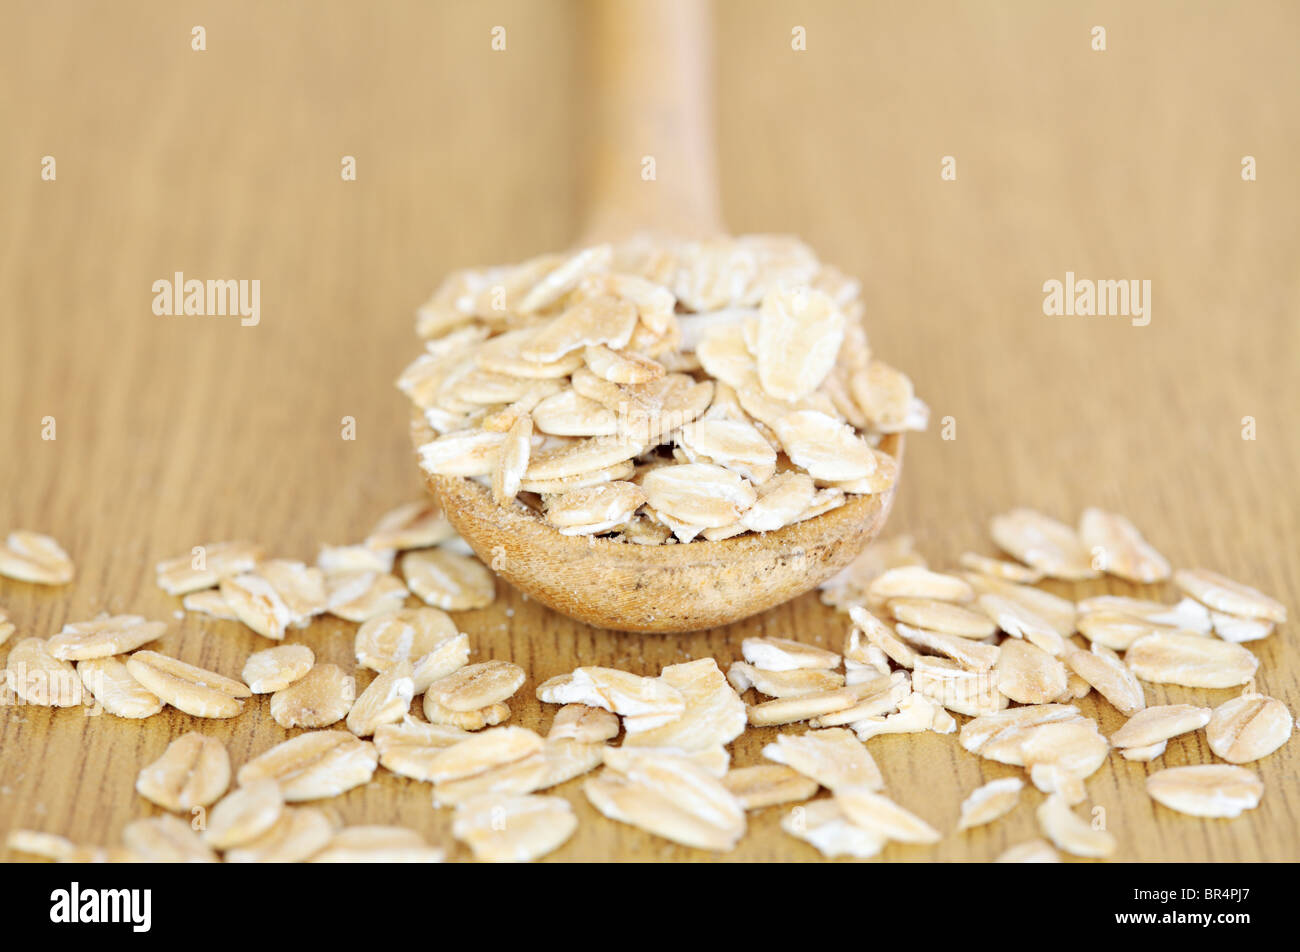 Whole Rolled Oats Stock Photo